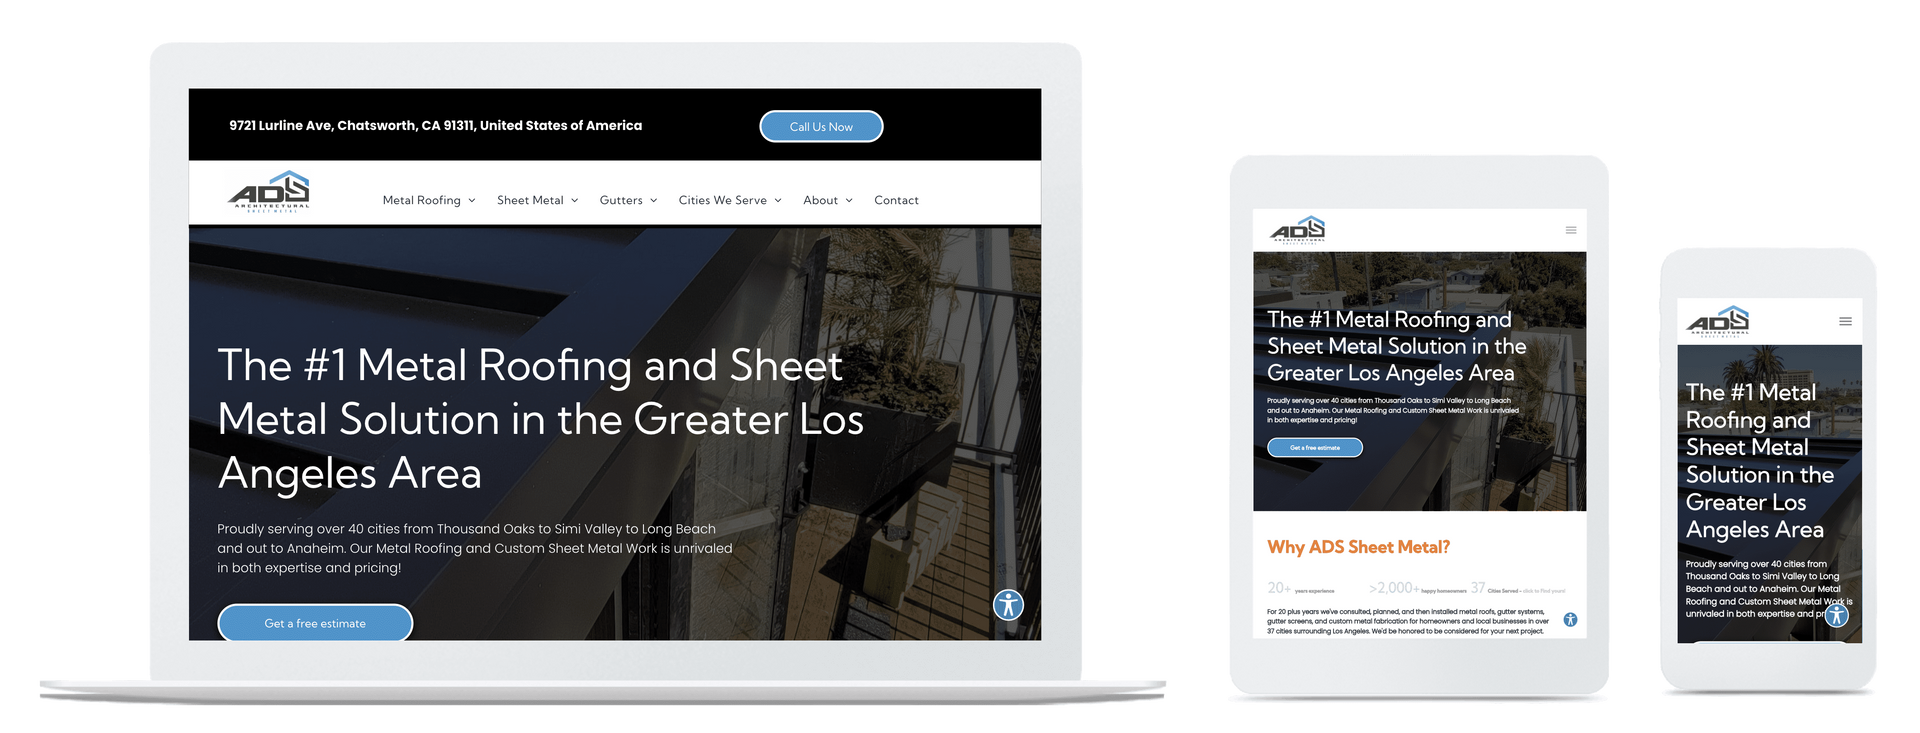 marketing case study,roofing website